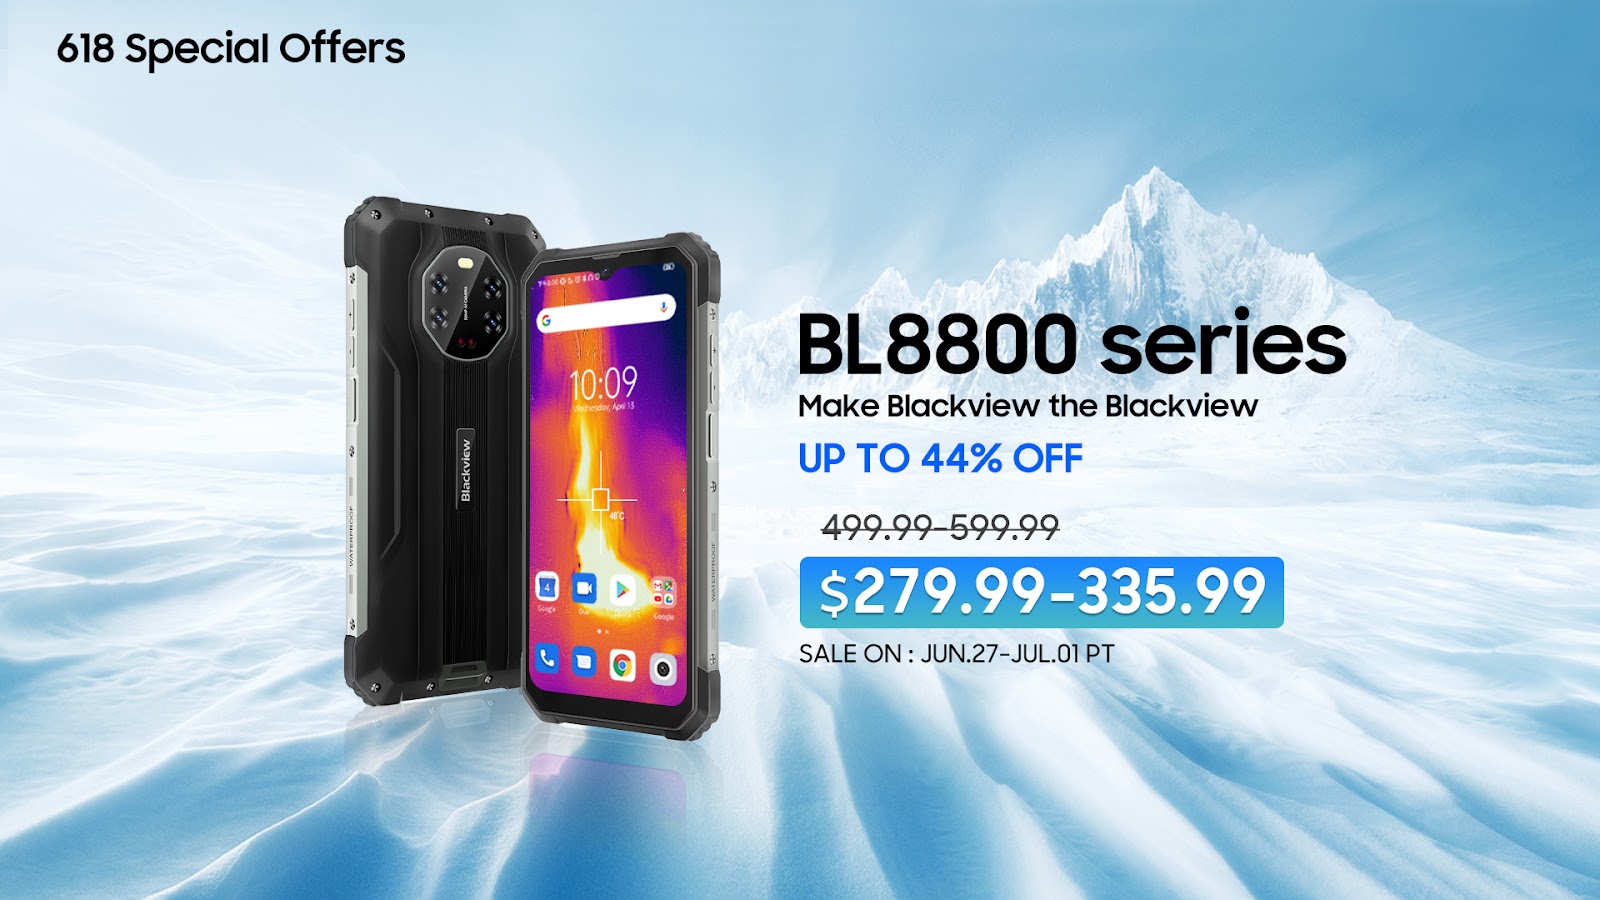 Blackview 618 summer sale 2022 goes live; massive discounts up to 4 off | DroidAfrica